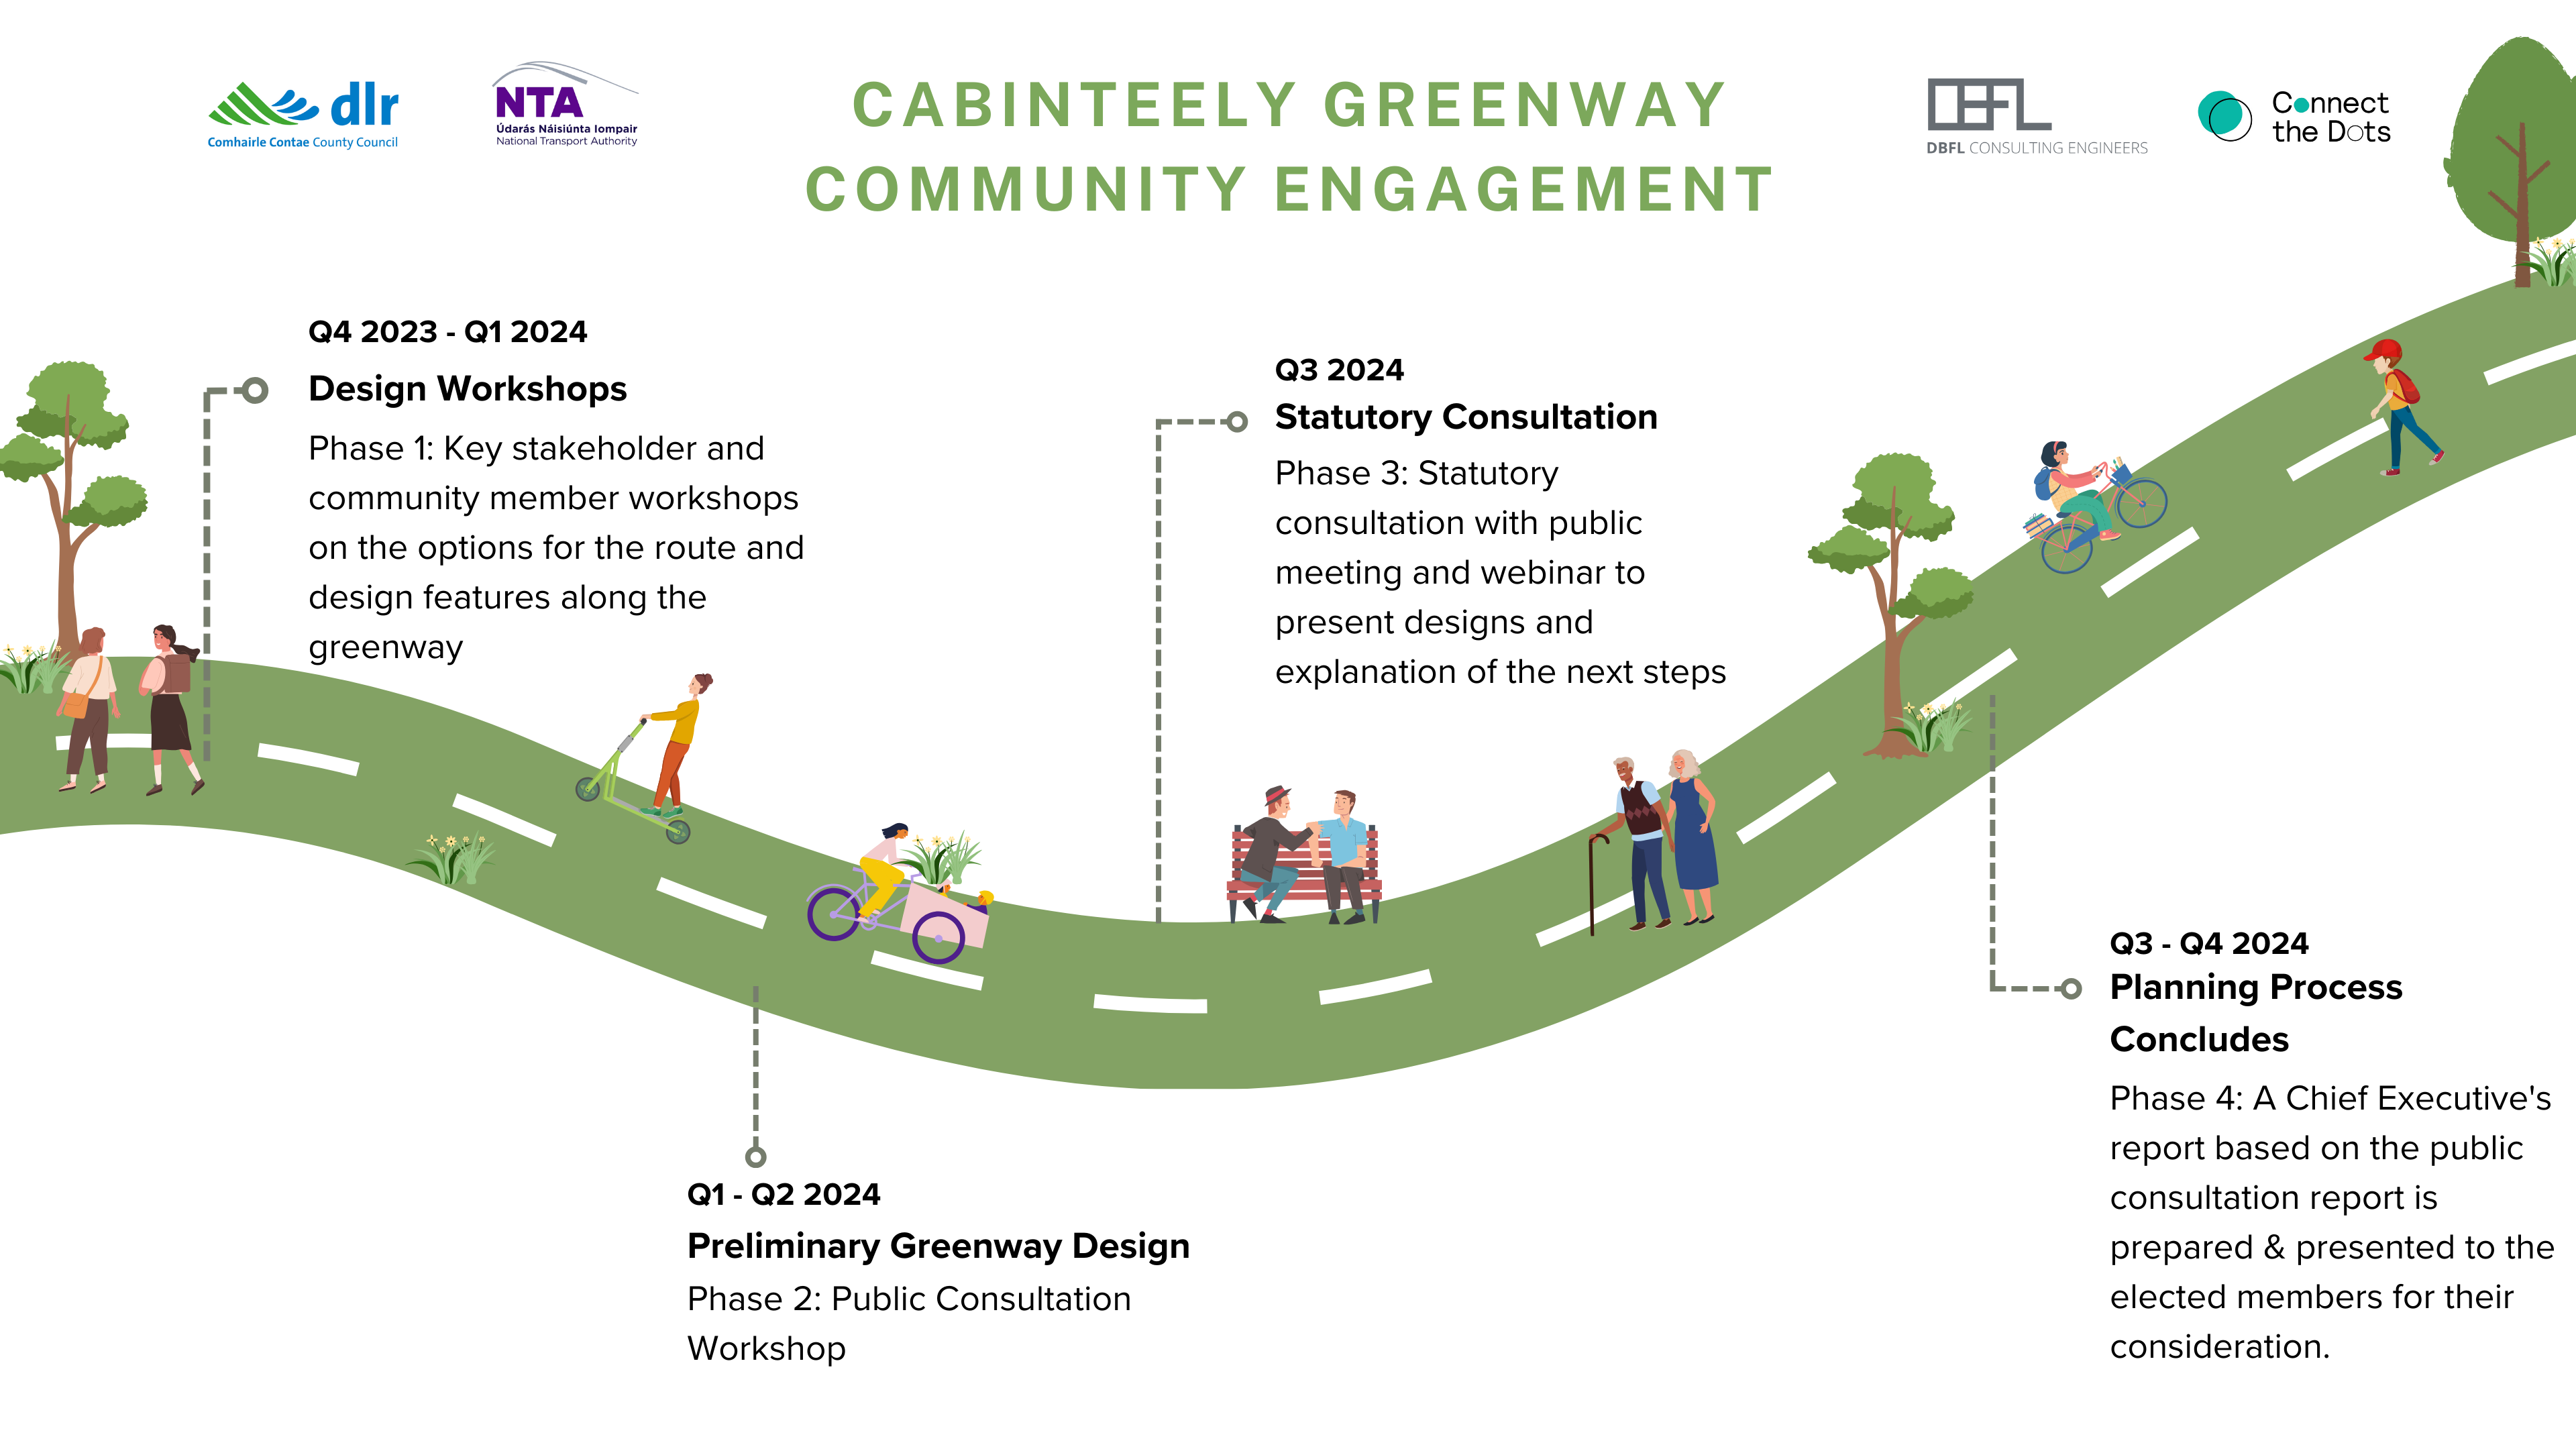 Image of Cabinteely Greenway project timeline